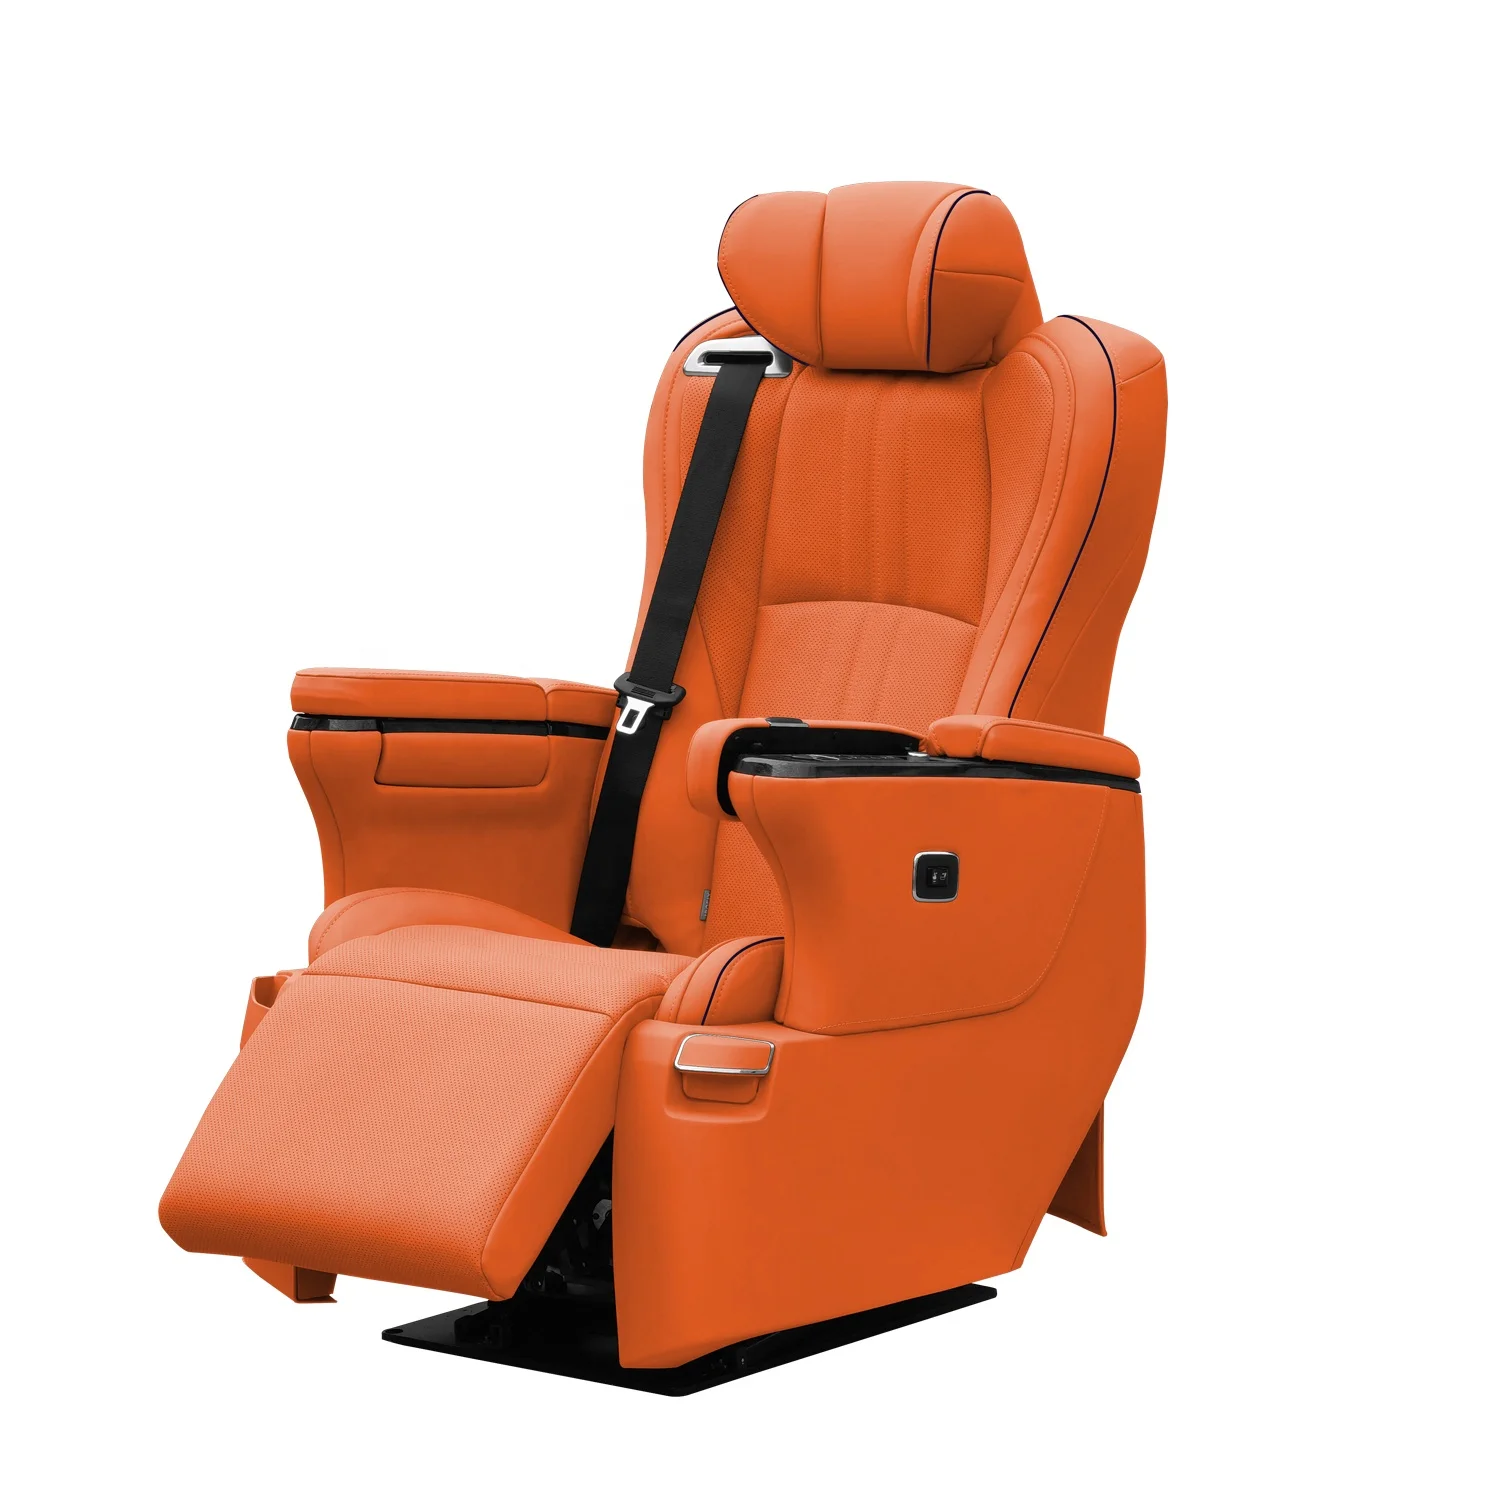 Luxury middle row car seat for fitment of MPV and Van like motorhome, Metris, Vito and so on